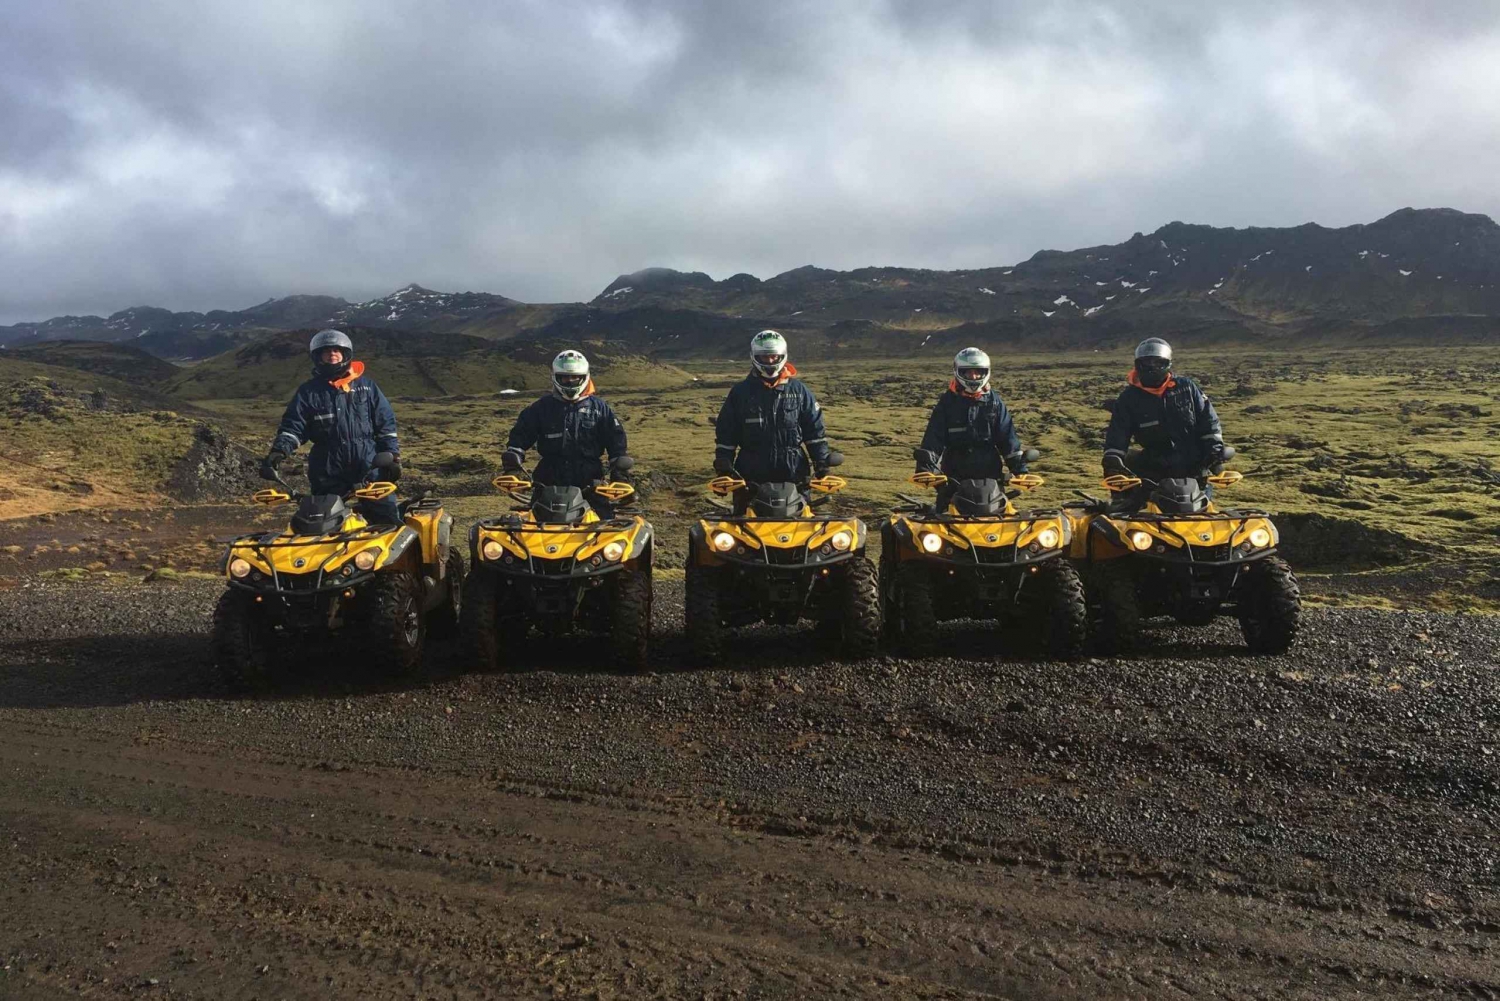 Caving & ATV day adventure with transport from Reykjavik